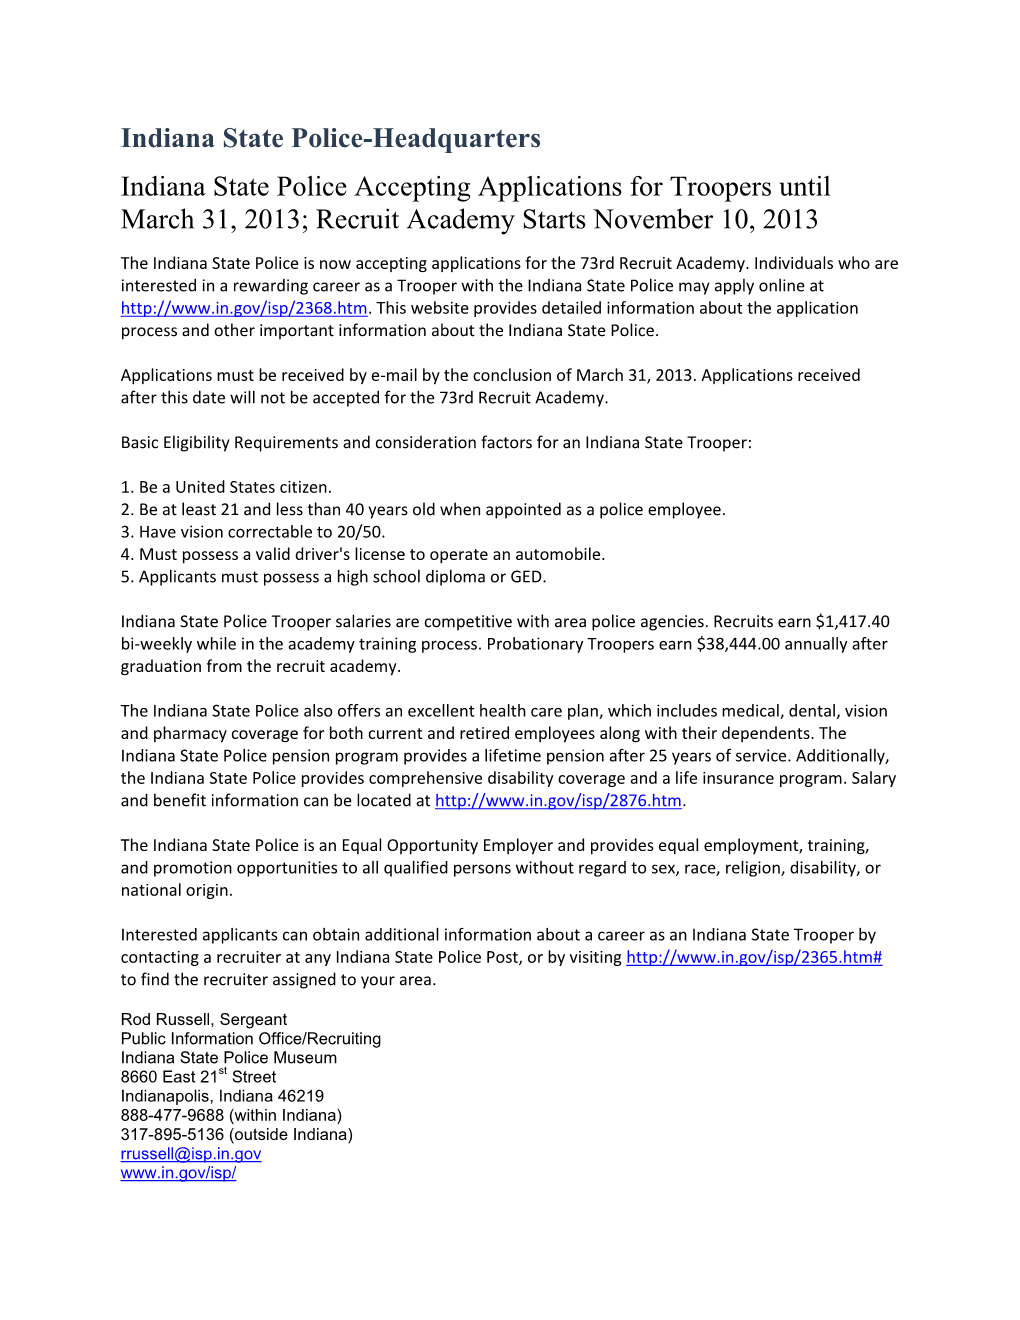 Indiana State Police-Headquarters Indiana State Police Accepting Applications for Troopers Until March 31, 2013; Recruit Academy Starts November 10, 2013